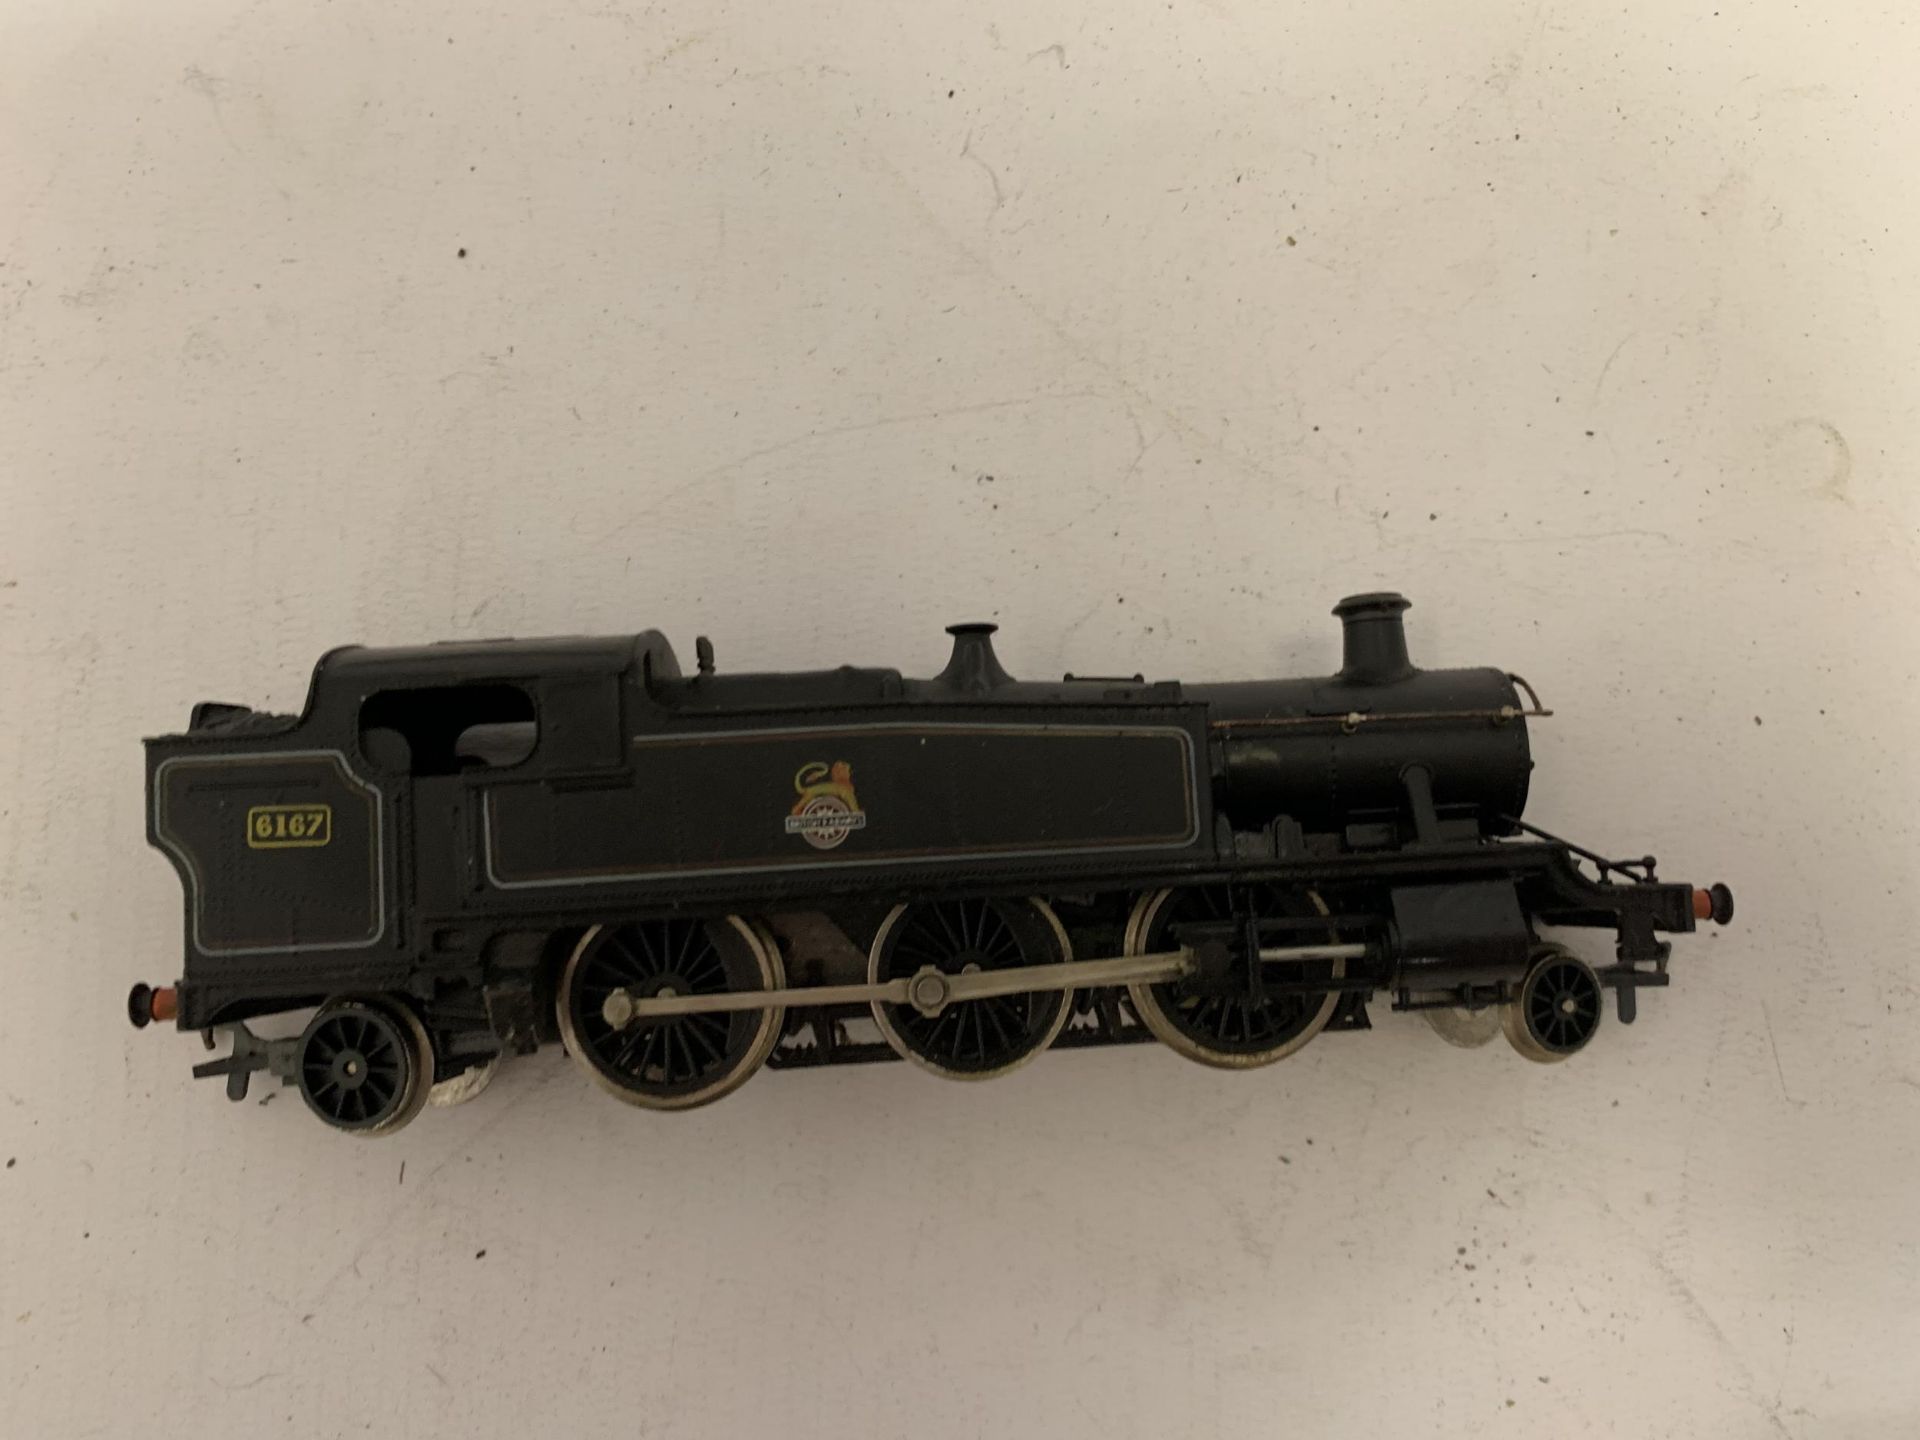 TWO 00 GAUGE STEAM ENGINES TO INCLUDE A 4-6-0 ALBERT HALL AND A 2-6-2 BR LIVERY NUMBER 6167 - Image 3 of 5